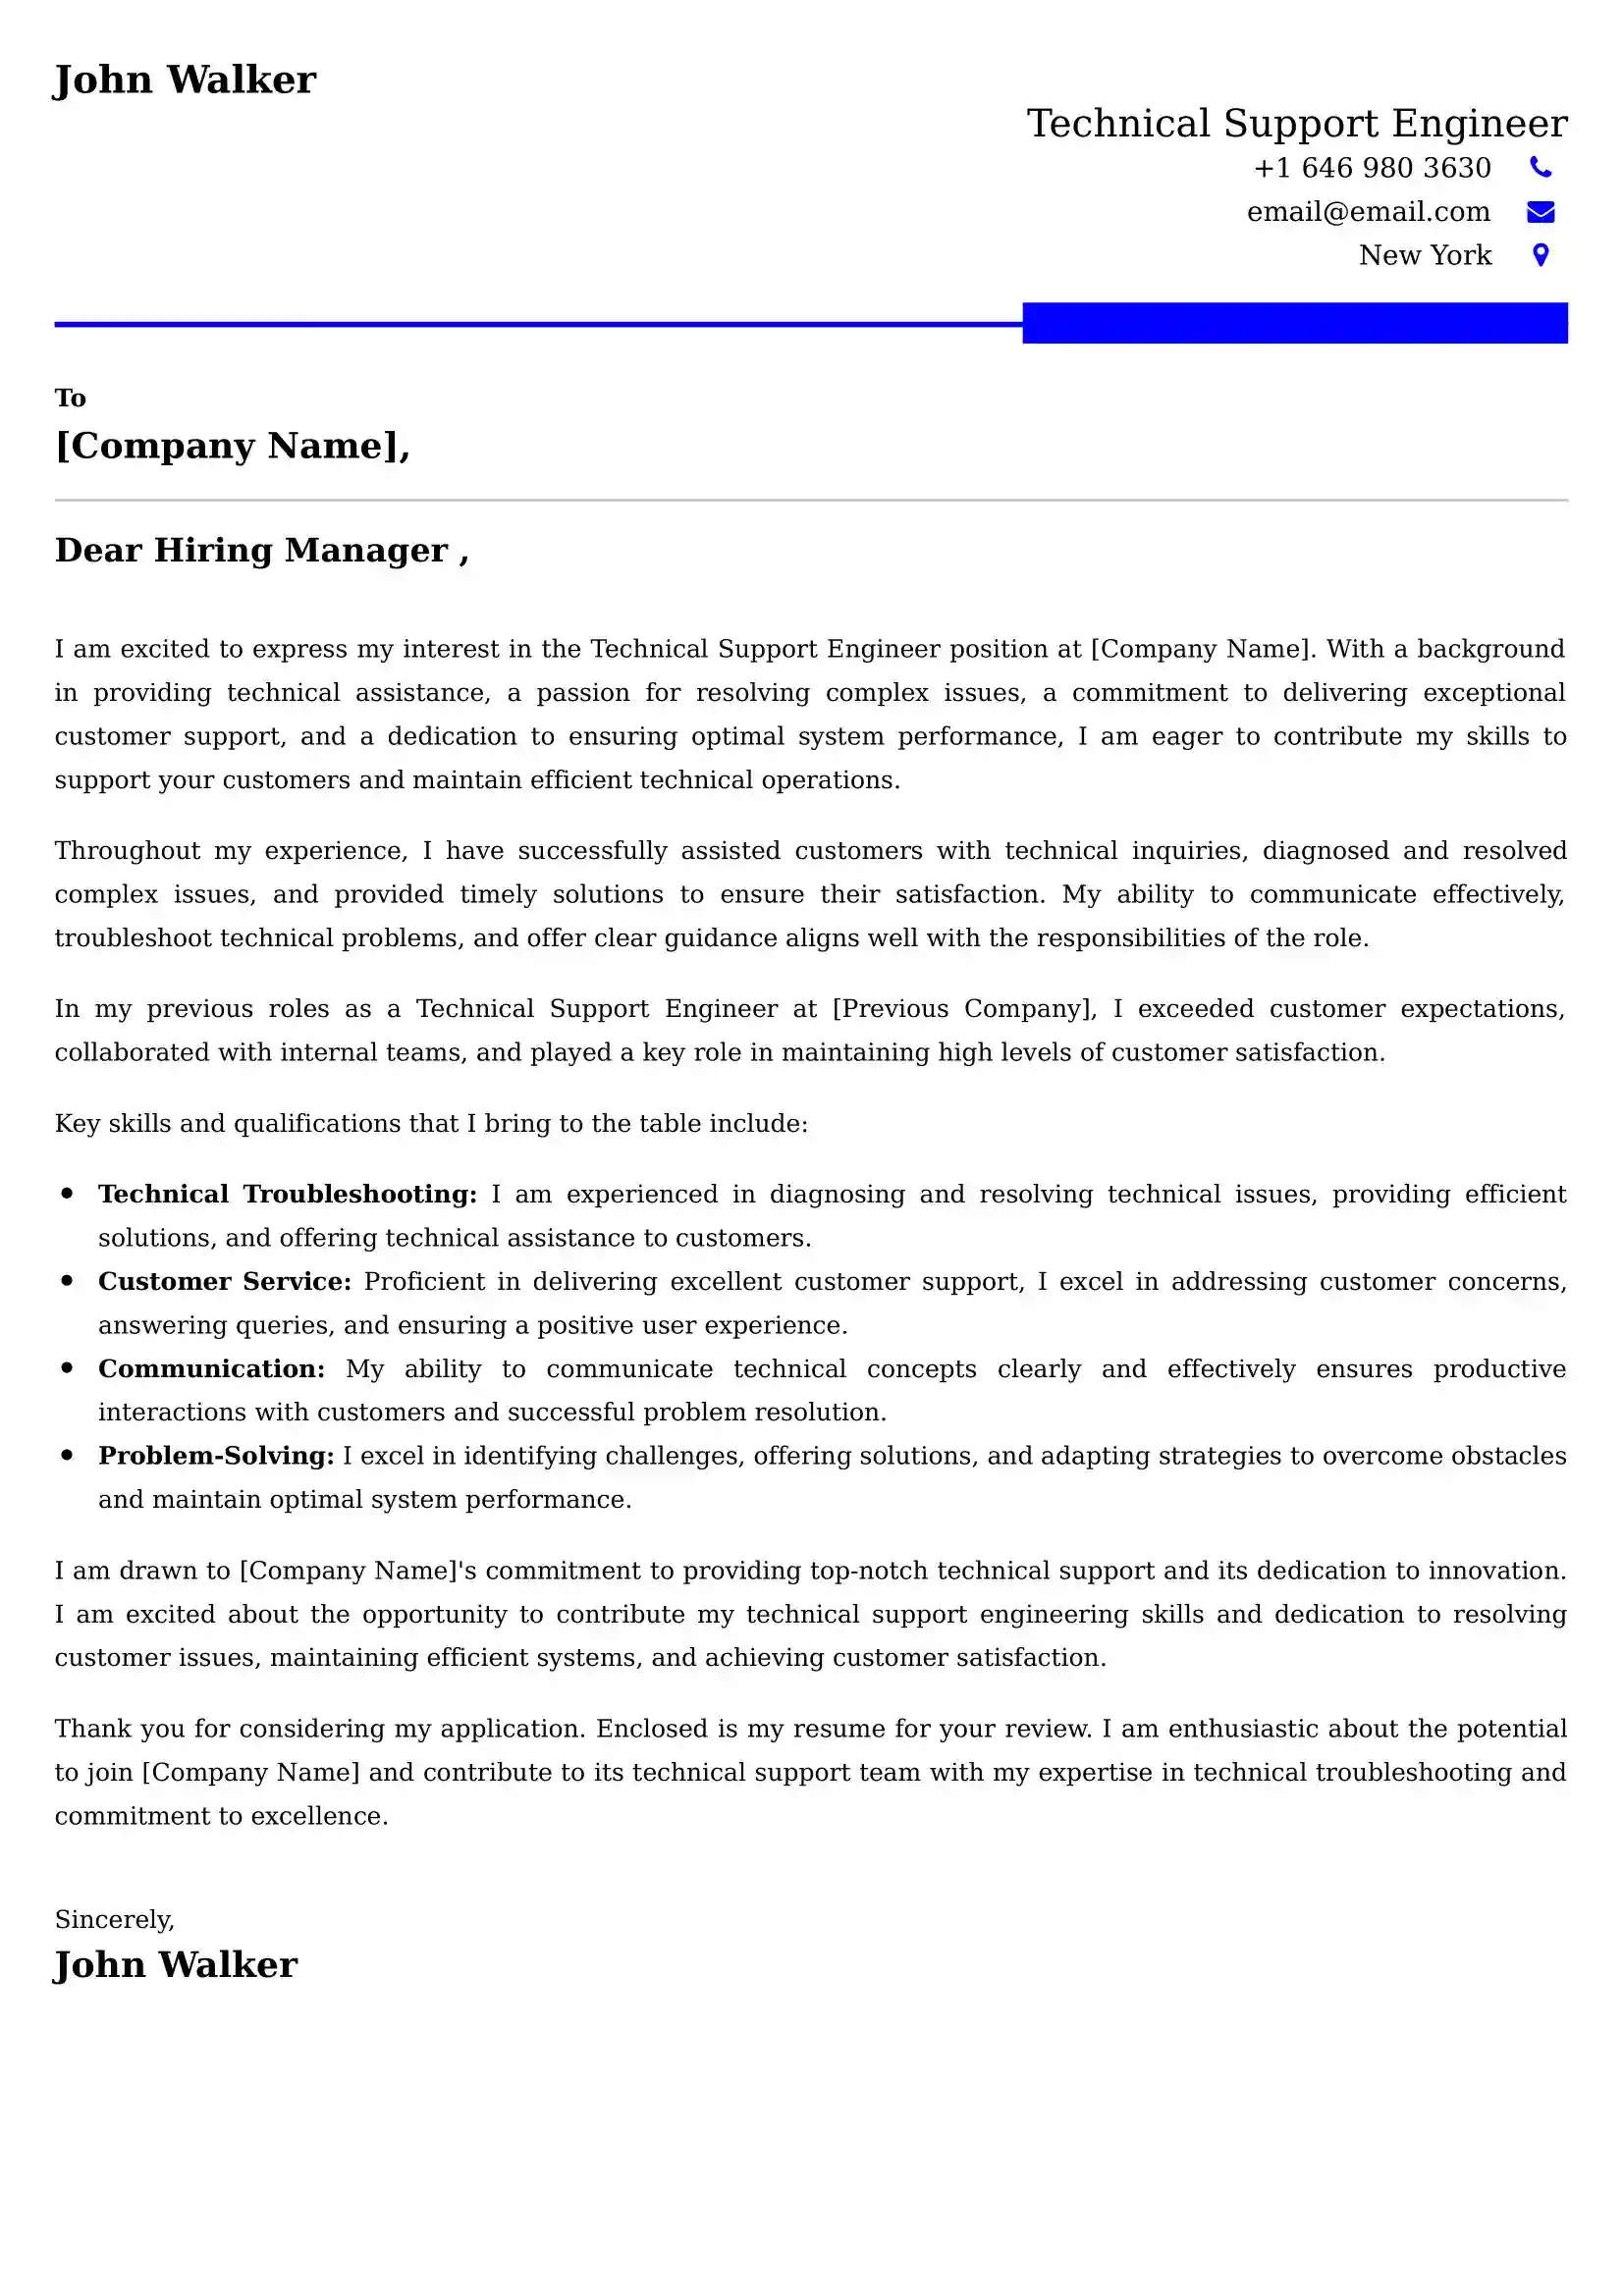 Technical Support Engineer Cover Letter Examples for UK 